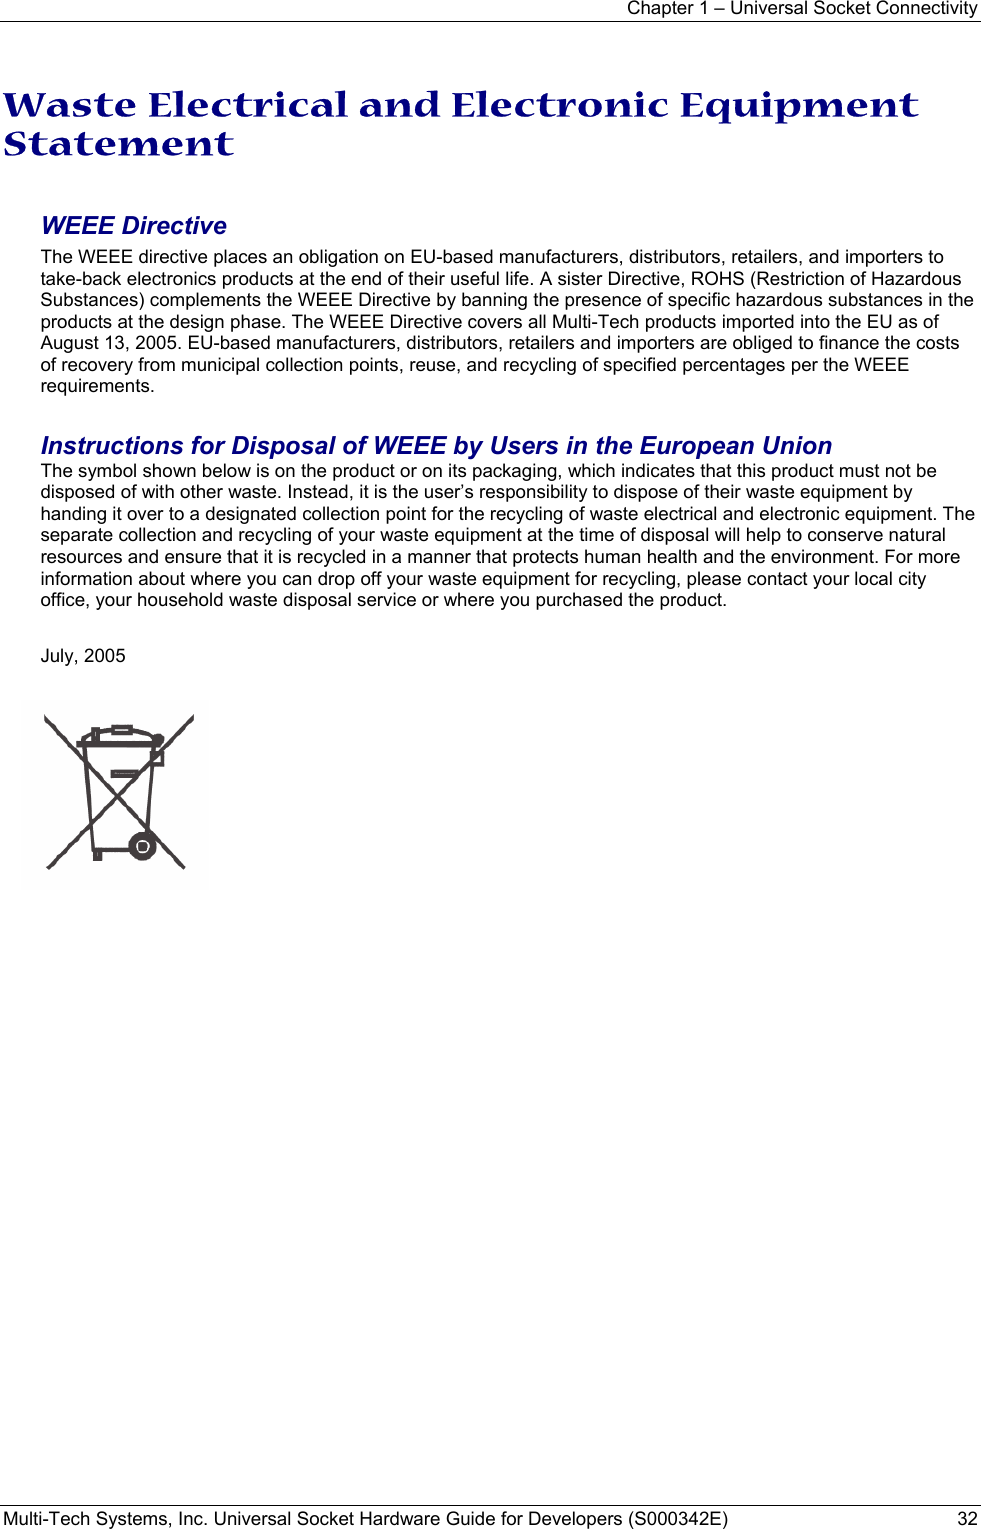 Chapter 1 – Universal Socket Connectivity Multi-Tech Systems, Inc. Universal Socket Hardware Guide for Developers (S000342E)  32  Waste Electrical and Electronic Equipment Statement  WEEE Directive The WEEE directive places an obligation on EU-based manufacturers, distributors, retailers, and importers to take-back electronics products at the end of their useful life. A sister Directive, ROHS (Restriction of Hazardous Substances) complements the WEEE Directive by banning the presence of specific hazardous substances in the products at the design phase. The WEEE Directive covers all Multi-Tech products imported into the EU as of August 13, 2005. EU-based manufacturers, distributors, retailers and importers are obliged to finance the costs of recovery from municipal collection points, reuse, and recycling of specified percentages per the WEEE requirements.  Instructions for Disposal of WEEE by Users in the European Union The symbol shown below is on the product or on its packaging, which indicates that this product must not be disposed of with other waste. Instead, it is the user’s responsibility to dispose of their waste equipment by handing it over to a designated collection point for the recycling of waste electrical and electronic equipment. The separate collection and recycling of your waste equipment at the time of disposal will help to conserve natural resources and ensure that it is recycled in a manner that protects human health and the environment. For more information about where you can drop off your waste equipment for recycling, please contact your local city office, your household waste disposal service or where you purchased the product.  July, 2005       